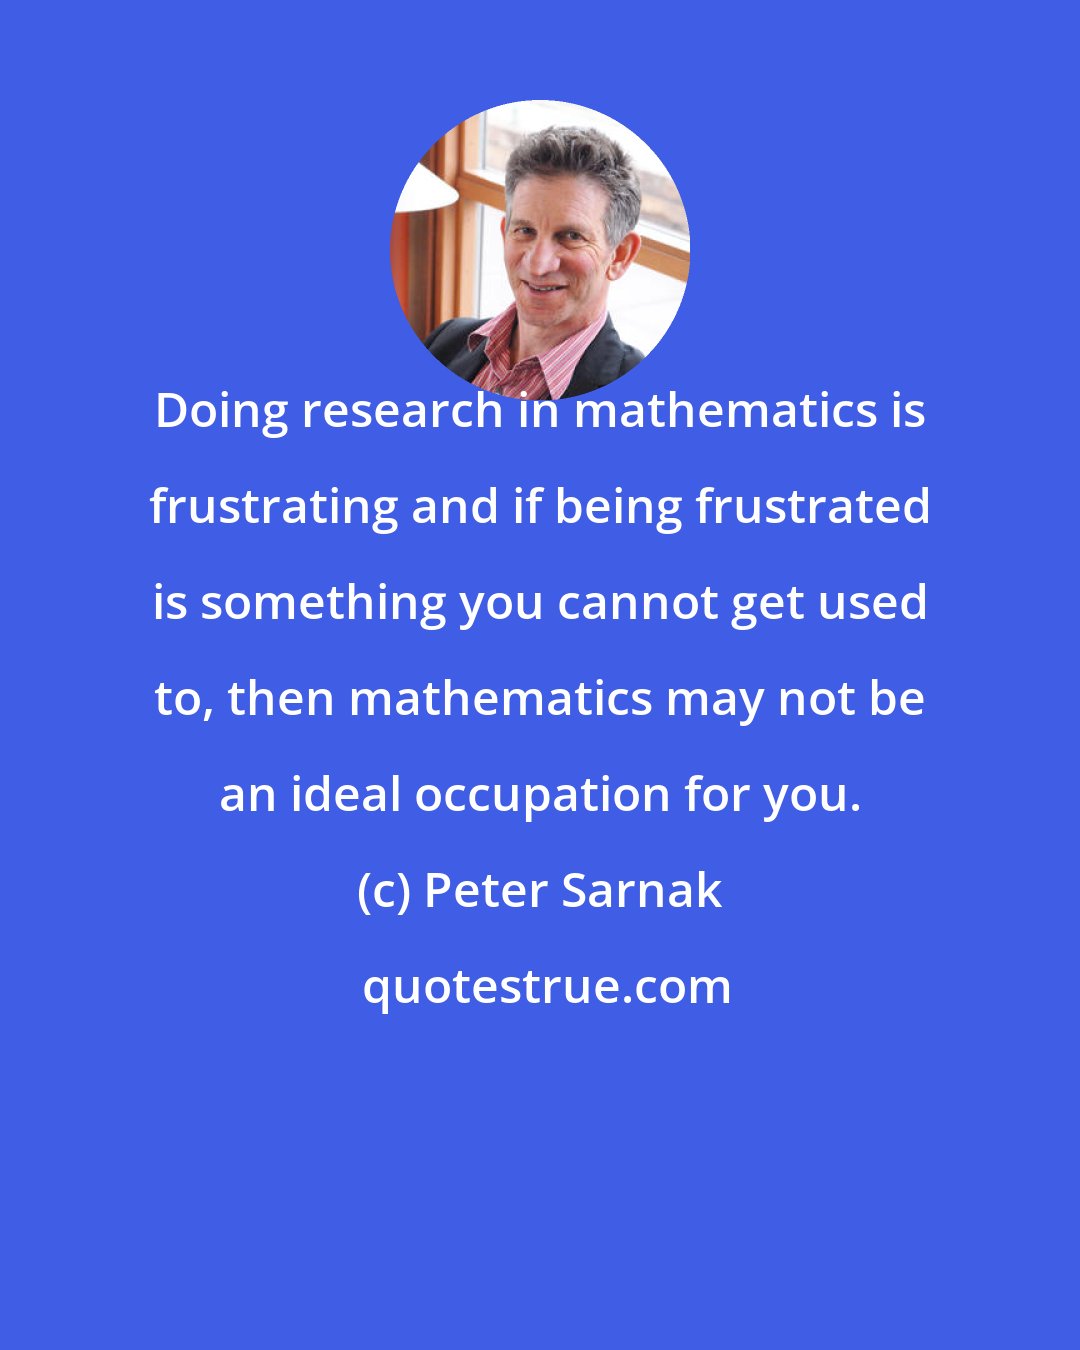 Peter Sarnak: Doing research in mathematics is frustrating and if being frustrated is something you cannot get used to, then mathematics may not be an ideal occupation for you.